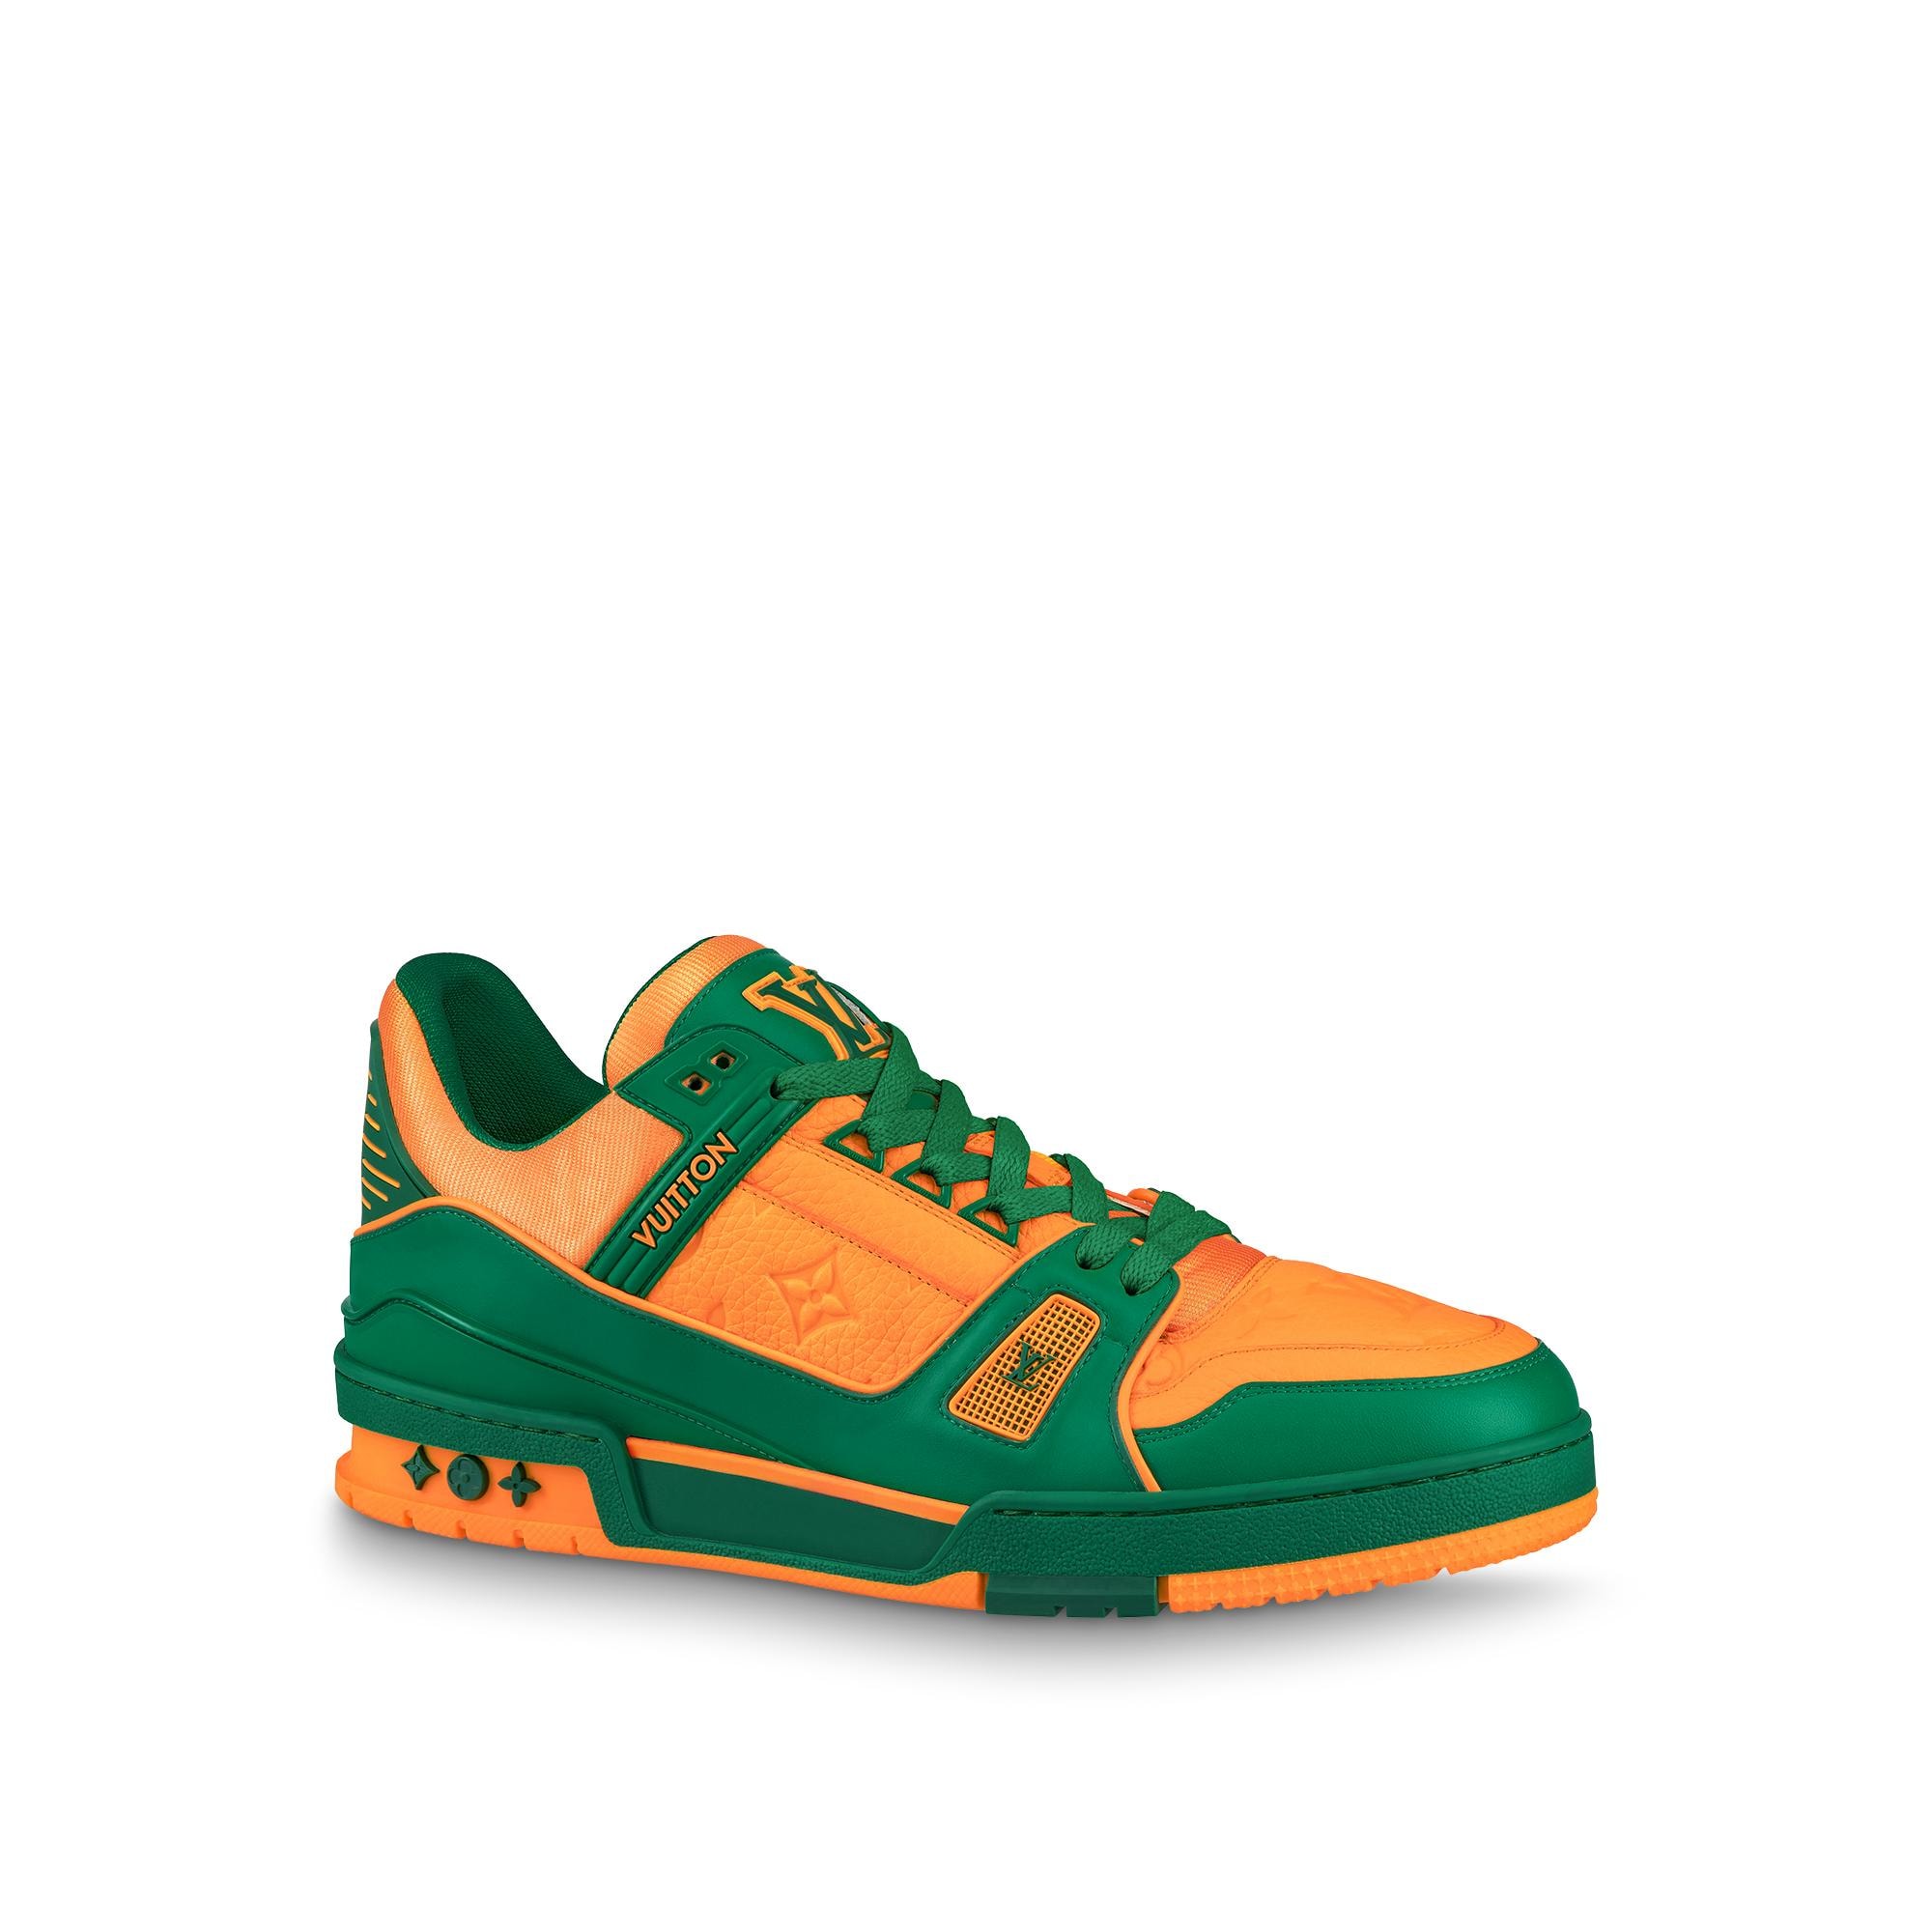 Louis Vuitton LV Trainer Sneaker in Green - Shoes 1A8WFR